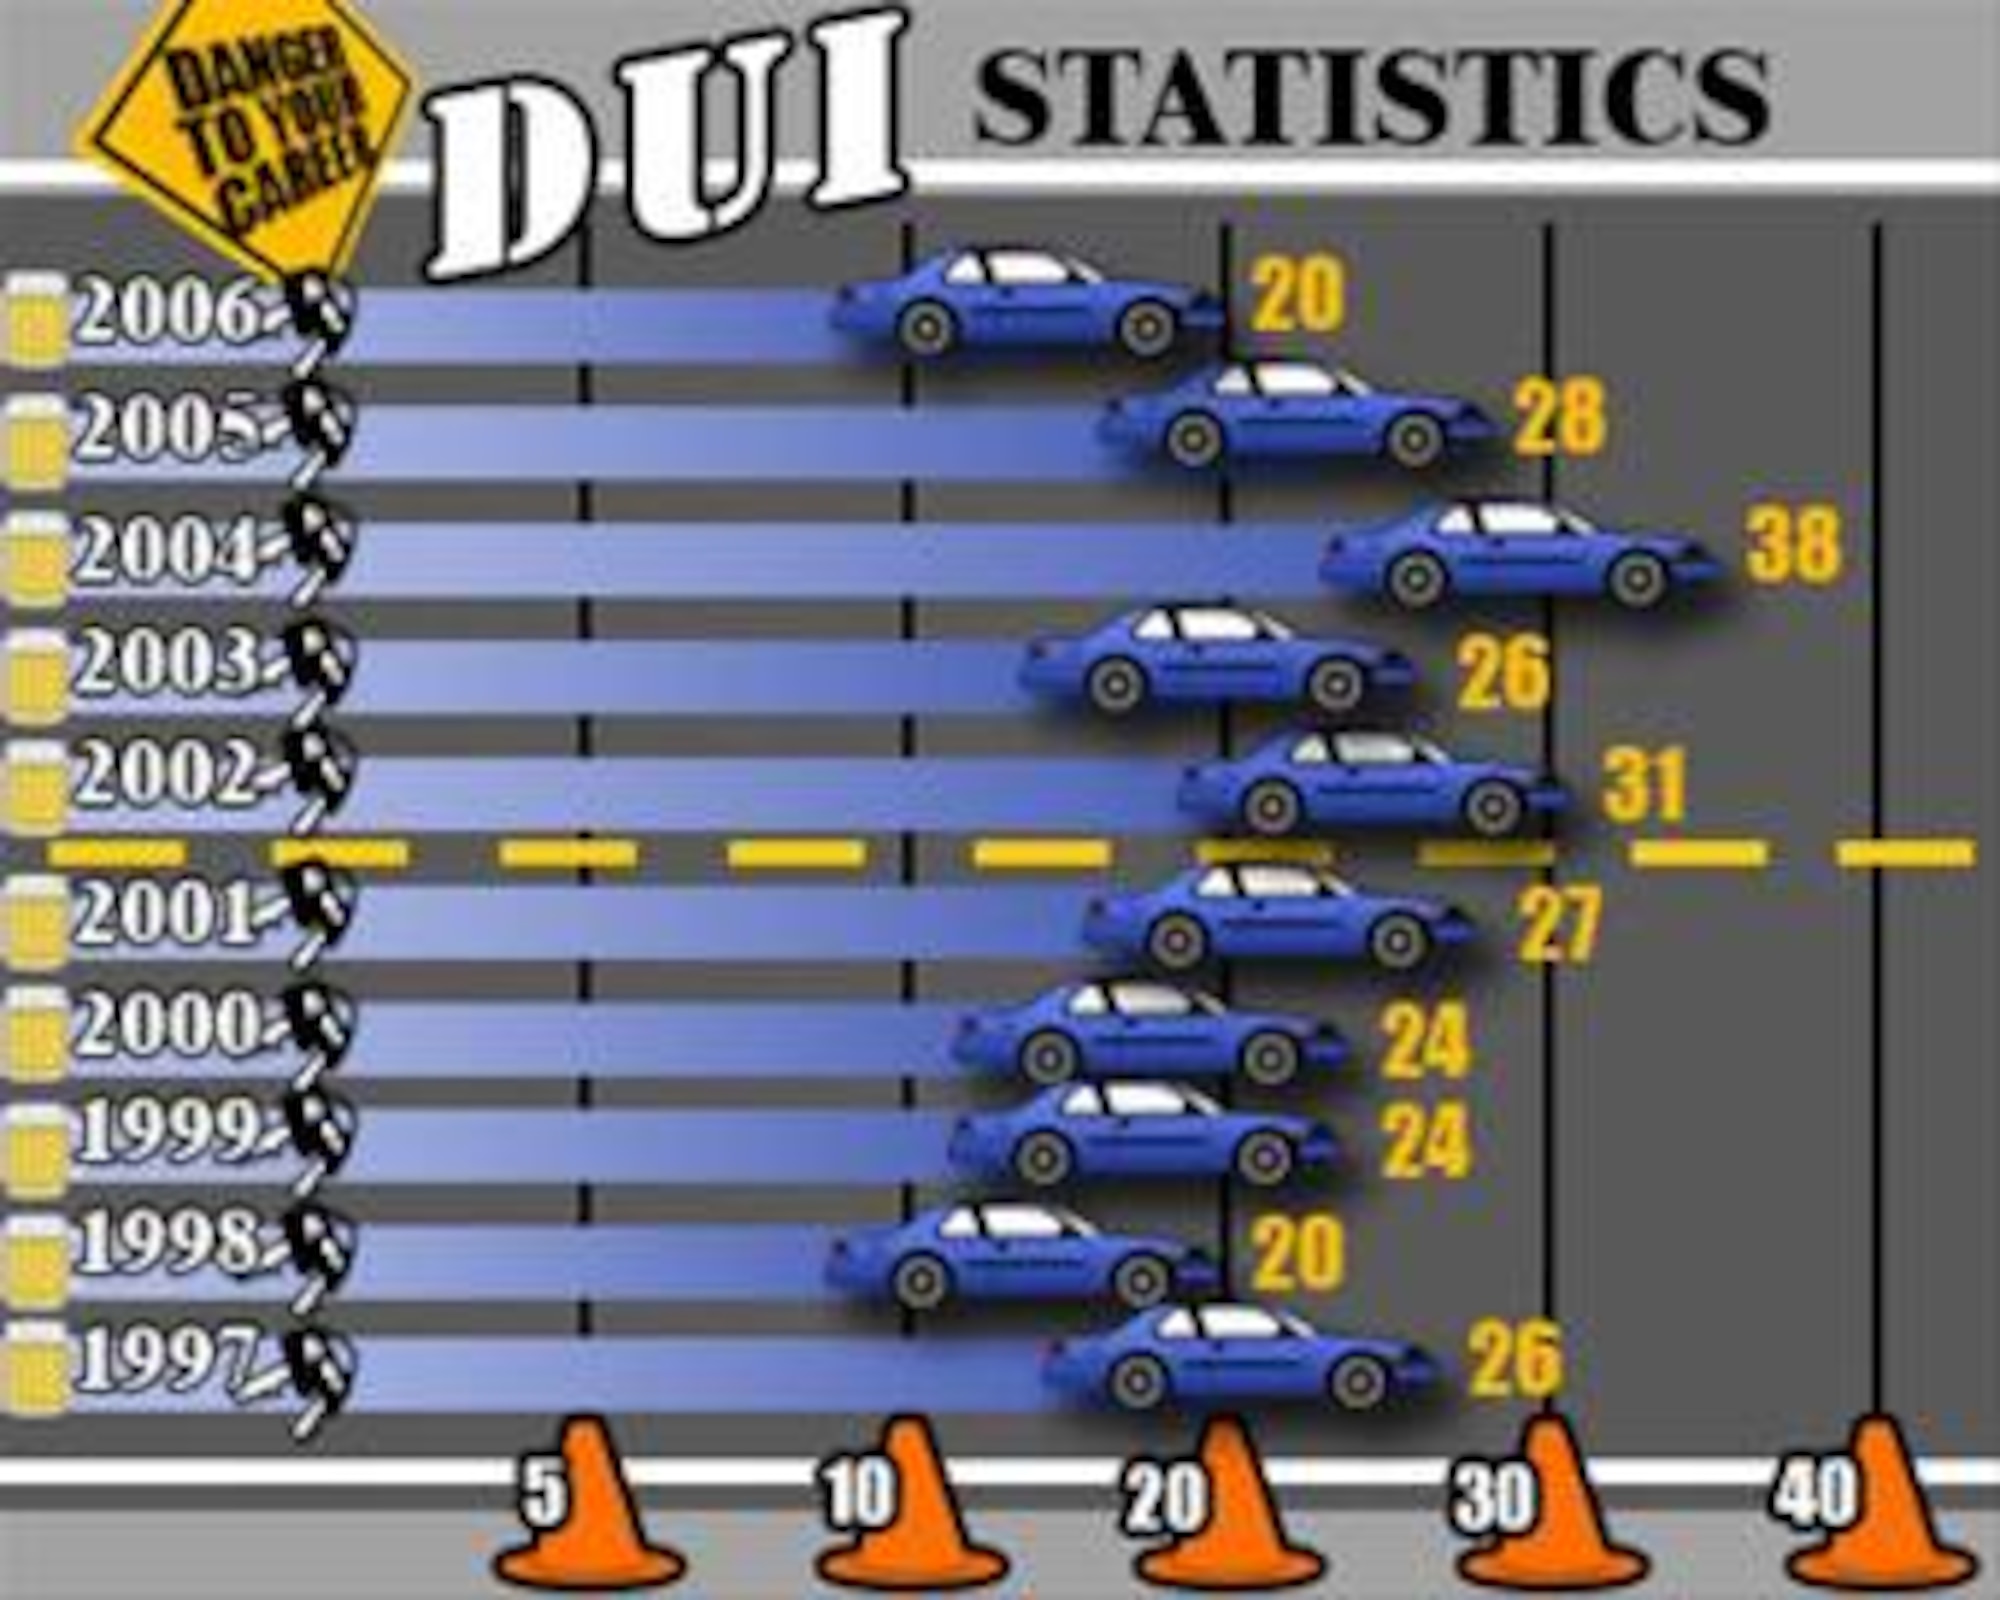 The number of Little Rock Air Force Base DUIs has decreased over the years. The chart above shows the trend of DUI numbers over a 10-year span.